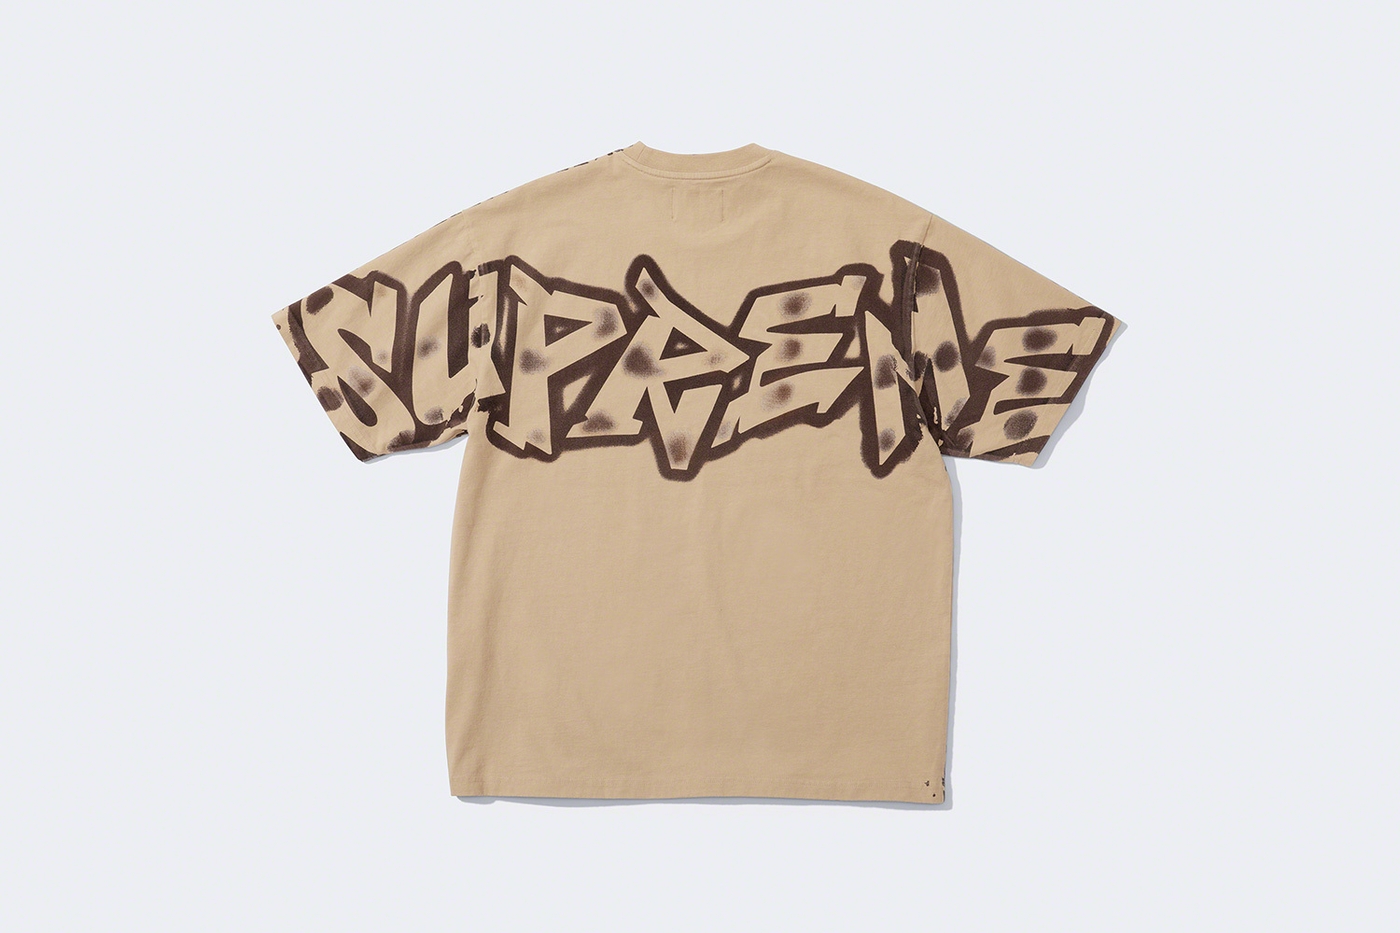 Airbrush S/S Top. Official Yankees™ merchandise made exclusively for Supreme. (23/36)